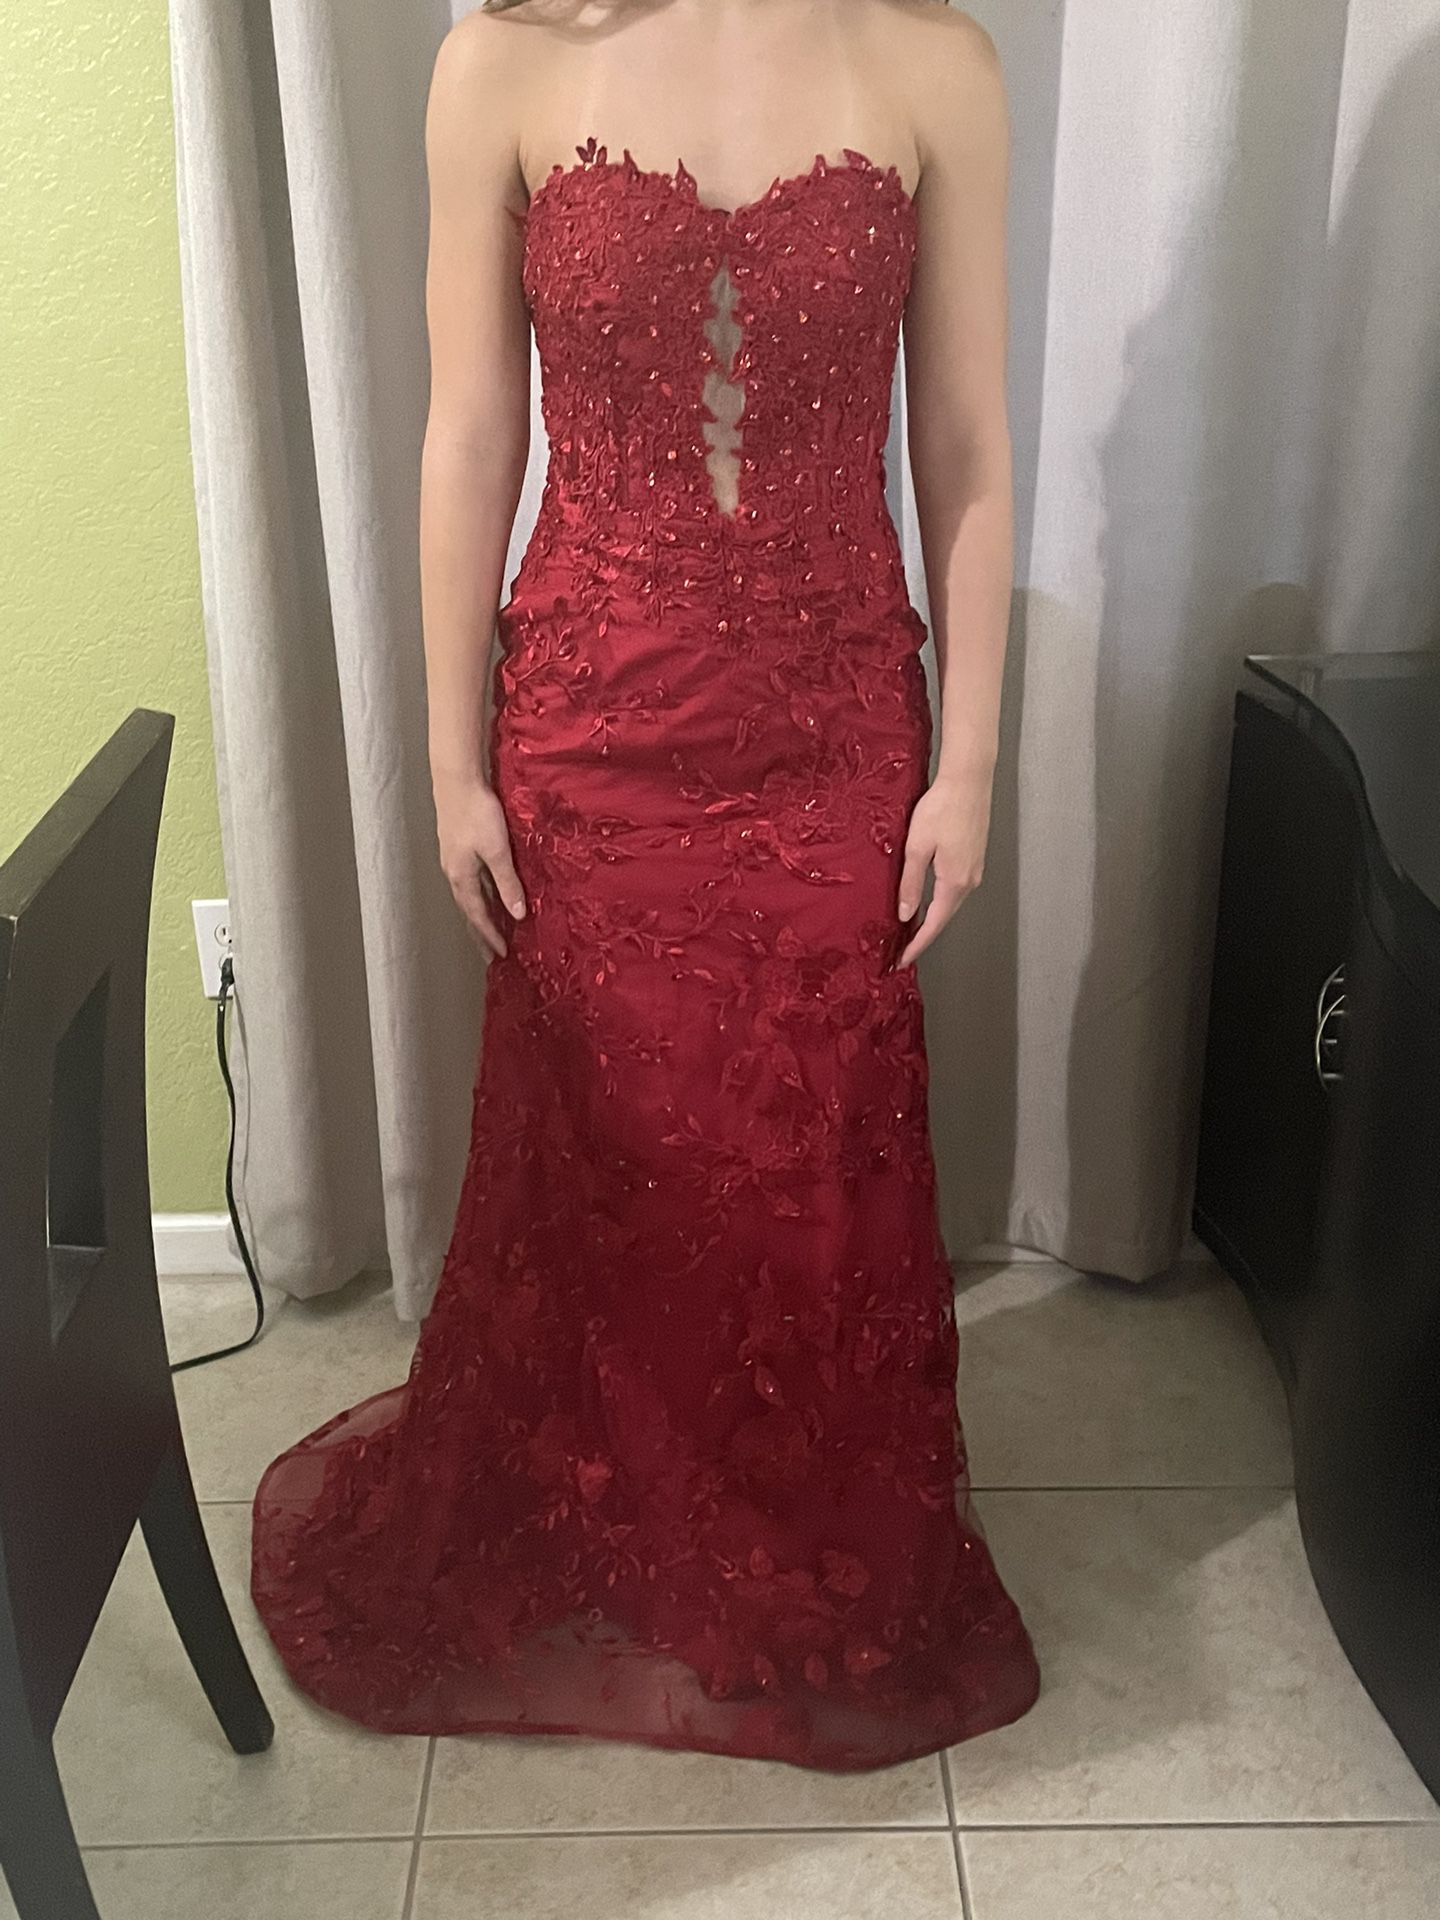 Red Prom Dress Size 6